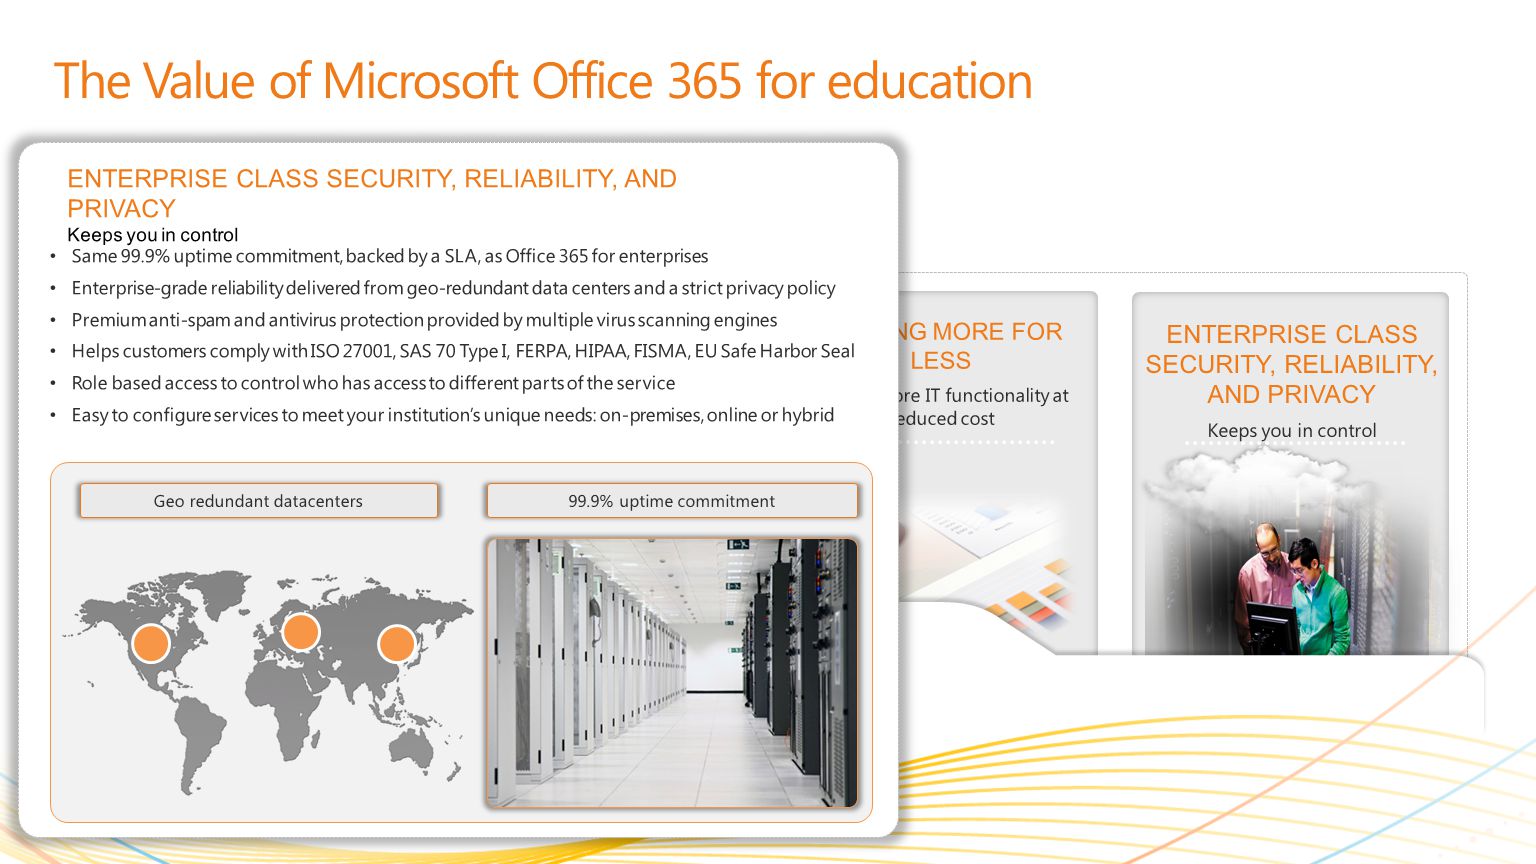 | Copyright© 2010 Microsoft Corporation GETTING MORE FOR LESS Deliver more IT functionality at reduced cost MEETING STUDENT AND EDUCATOR NEEDS Learning together, smarter LEARNING FROM ANYWHERE * Solve problems from more places ENTERPRISE CLASS SECURITY, RELIABILITY, AND PRIVACY Keeps you in control The Value of Microsoft Office 365 for education Same 99.9% uptime commitment, backed by a SLA, as Office 365 for enterprises Enterprise-grade reliability delivered from geo-redundant data centers and a strict privacy policy Premium anti-spam and antivirus protection provided by multiple virus scanning engines Helps customers comply with ISO 27001, SAS 70 Type I, FERPA, HIPAA, FISMA, EU Safe Harbor Seal Role based access to control who has access to different parts of the service Easy to configure services to meet your institutions unique needs: on-premises, online or hybrid ENTERPRISE CLASS SECURITY, RELIABILITY, AND PRIVACY Keeps you in control 99.9% uptime commitmentGeo redundant datacenters